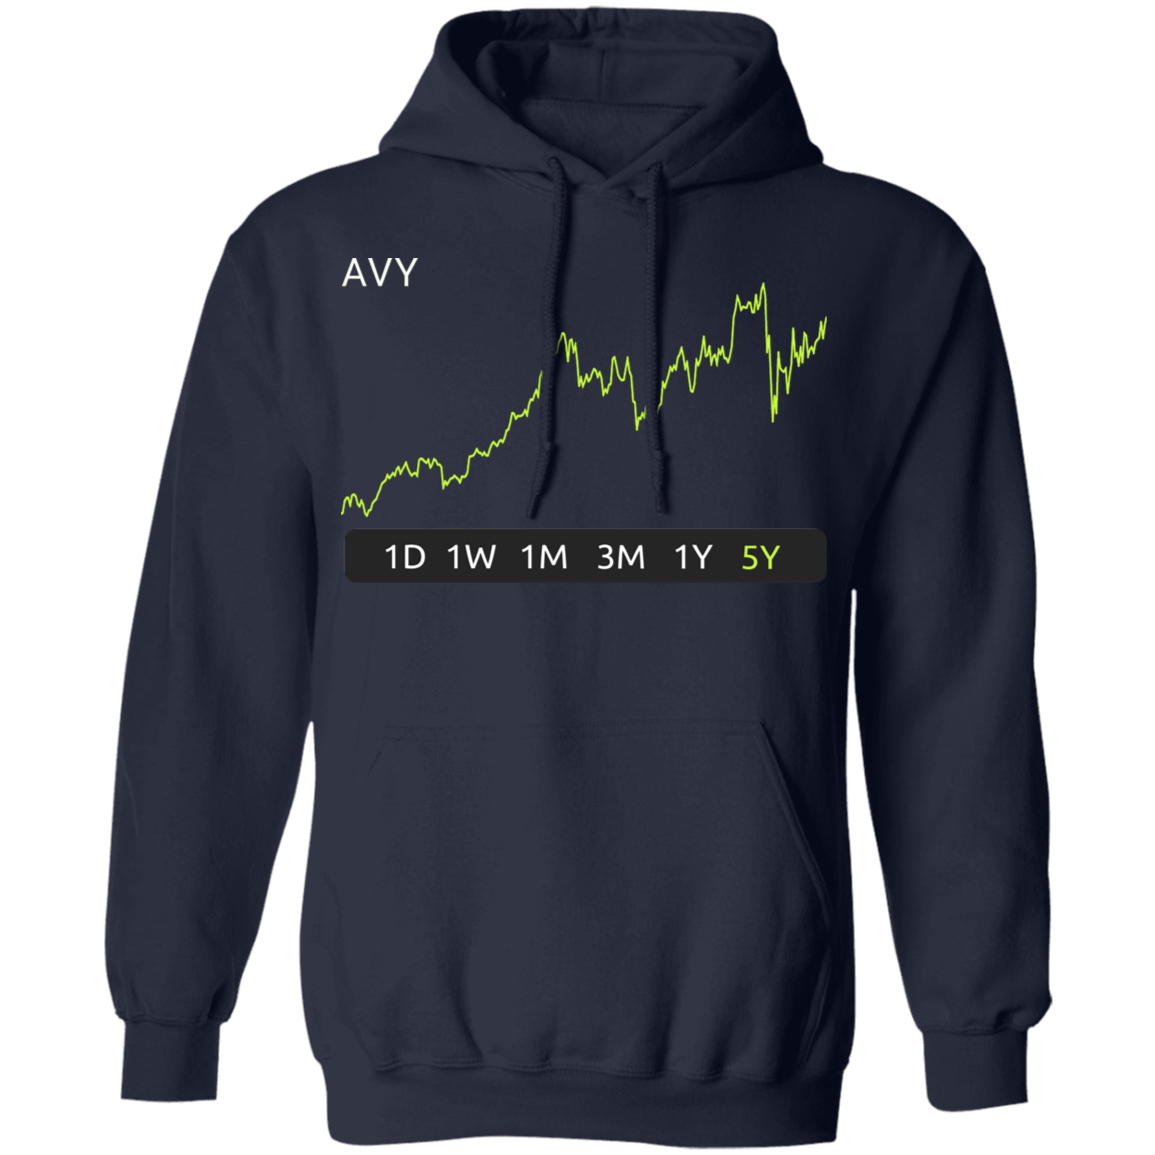 AVY Stock 5y Pullover Hoodie